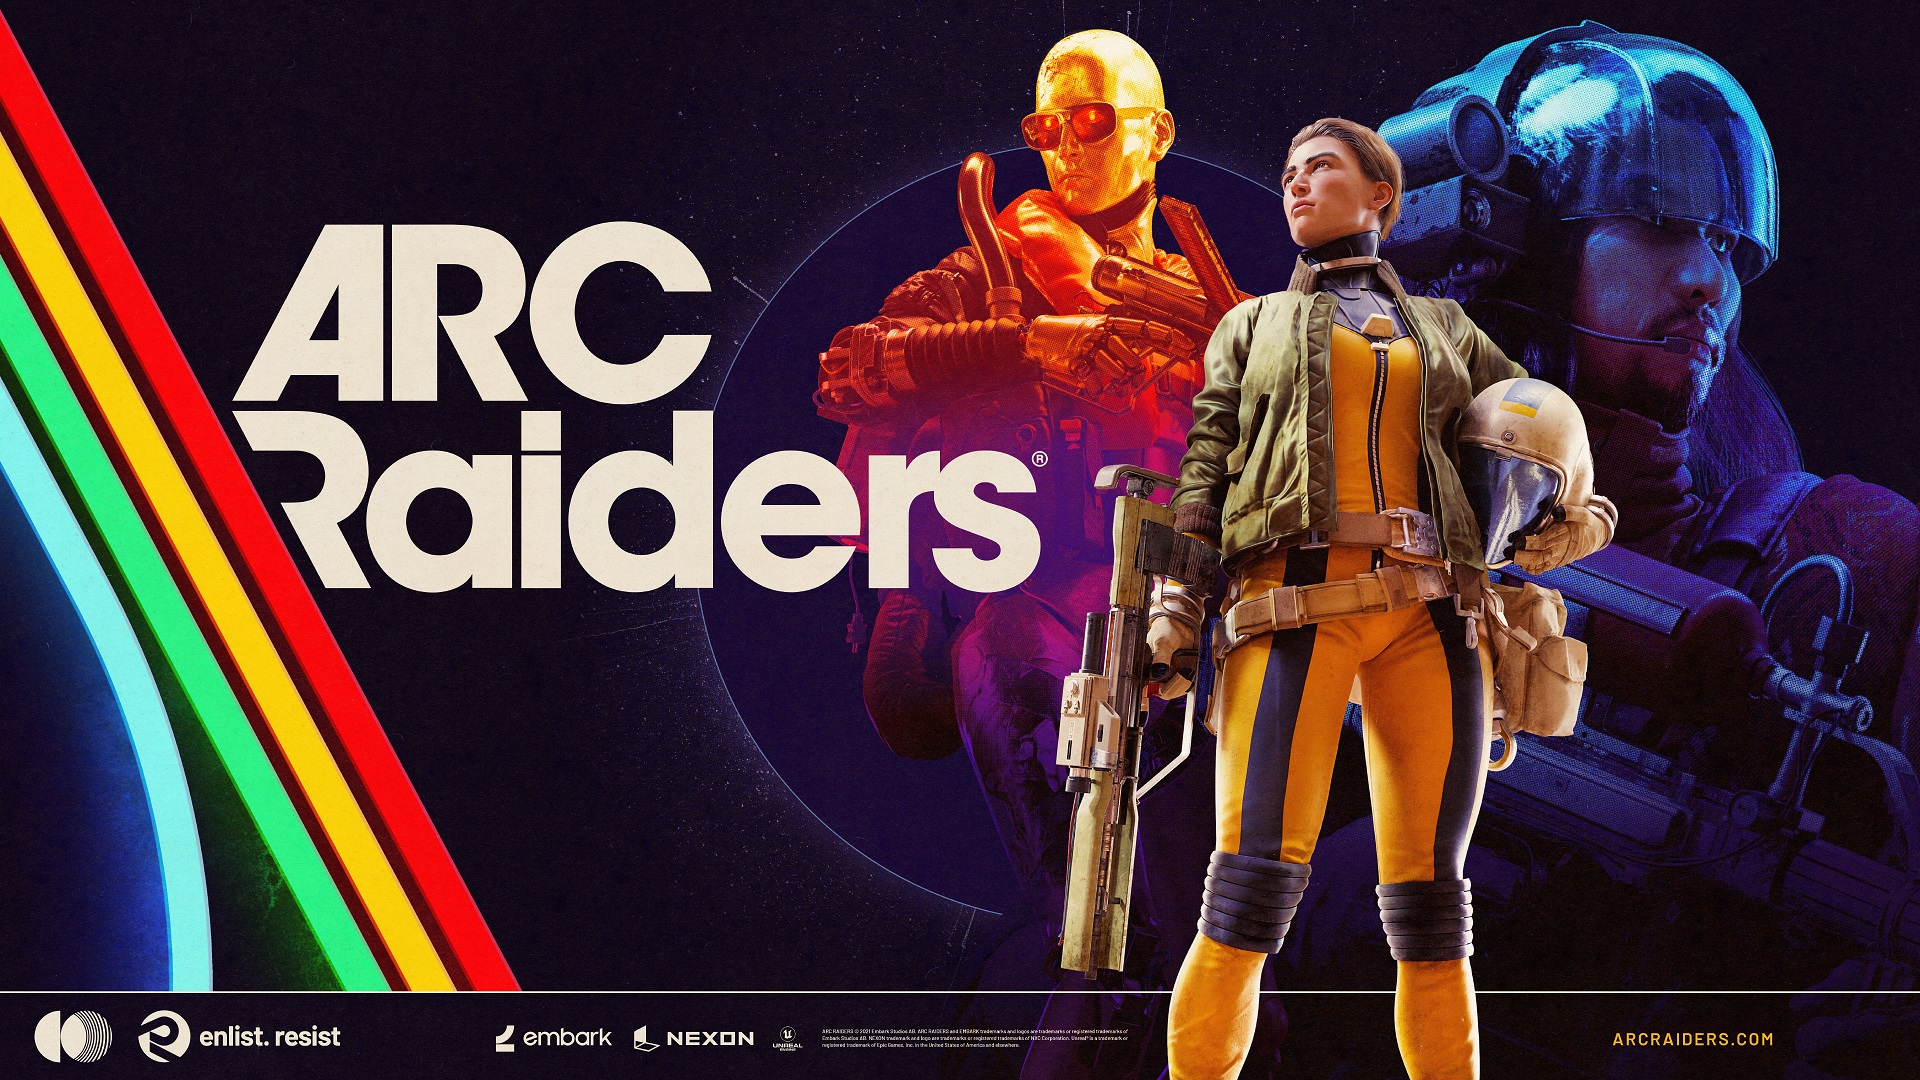 ARC Raiders Launches in 2022